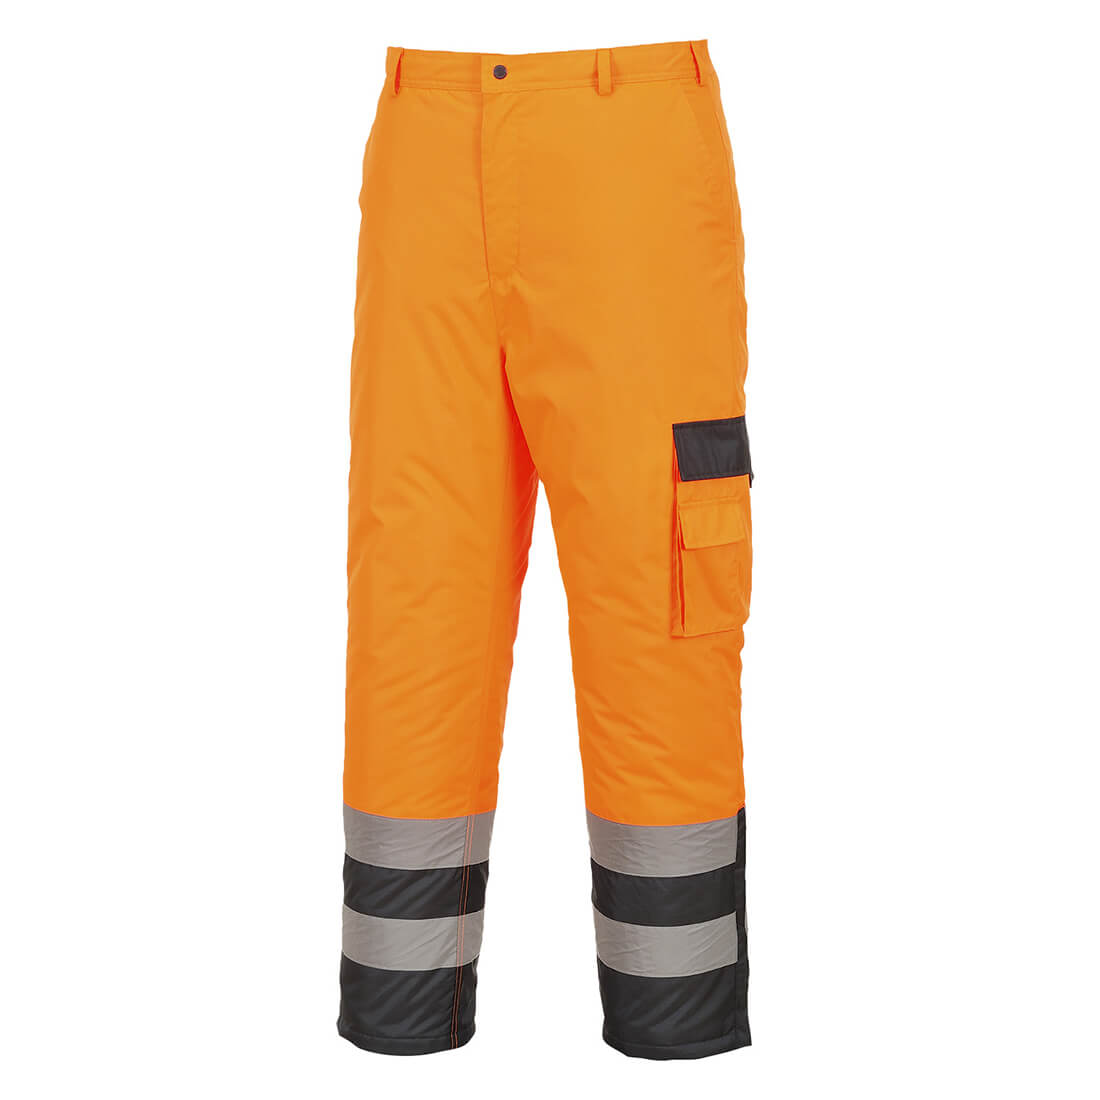 Photo of Oxford Weave 300d Class 2 Lined Contrast Hi Vis Breathable Trousers Orange / Navy S